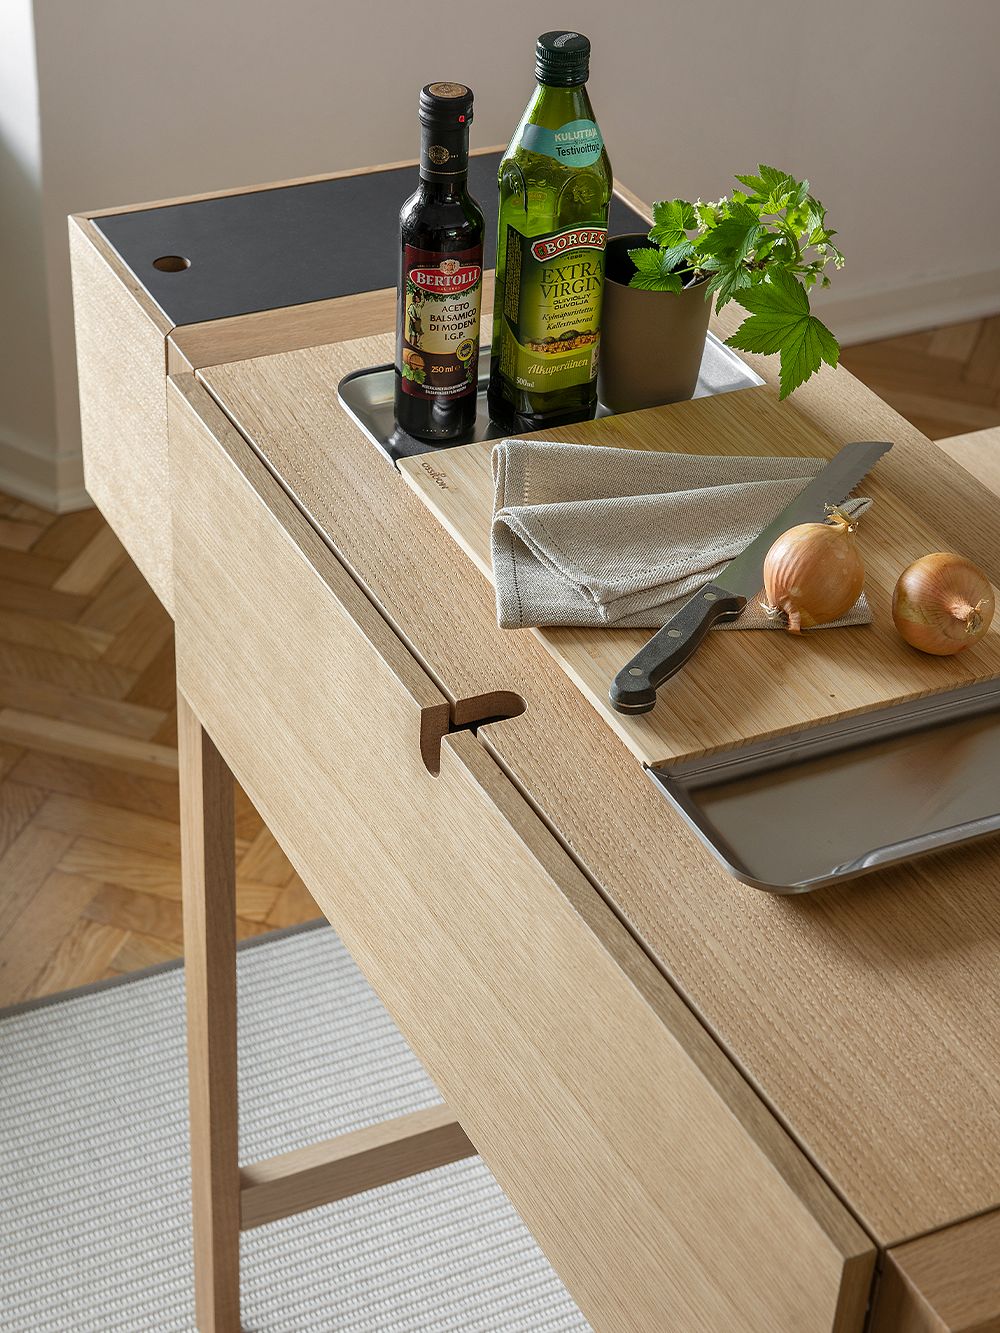 On top of Tapio Anttila's Jat-ko workstation are a onions cutting board and a knife as well as oil bottles and a herb pot.